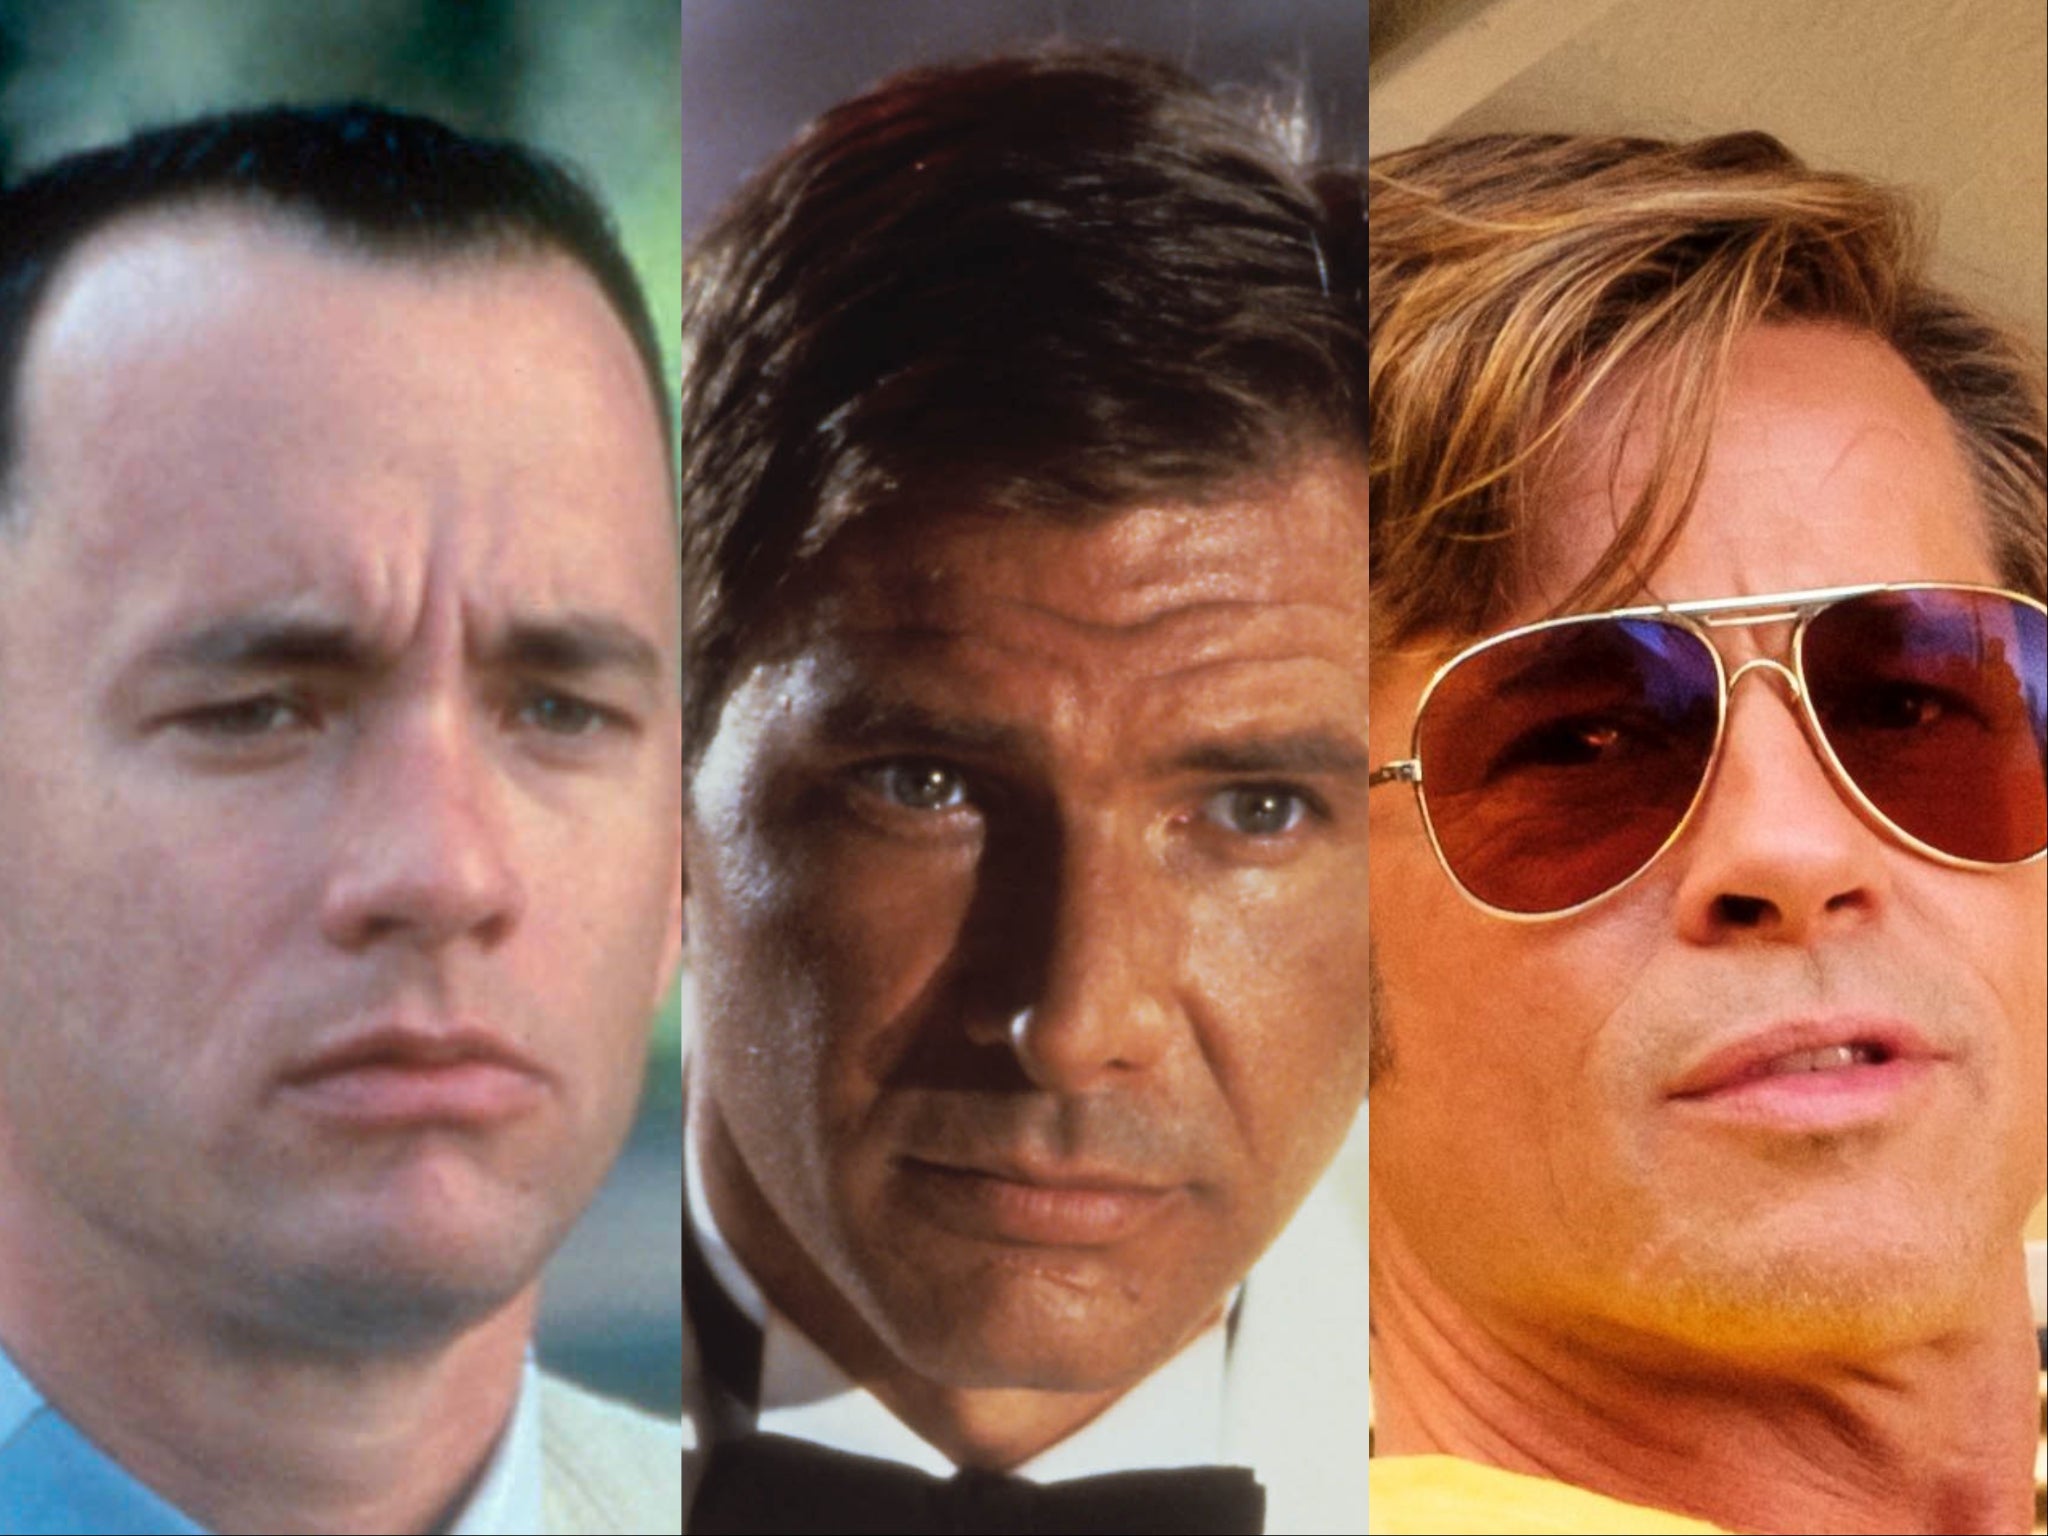 Tom Hanks in ‘Forrest Gump’, Harrison Ford in ‘Temple of Doom’ and Brad Pitt in ‘Once Upon a Time in Hollywood'